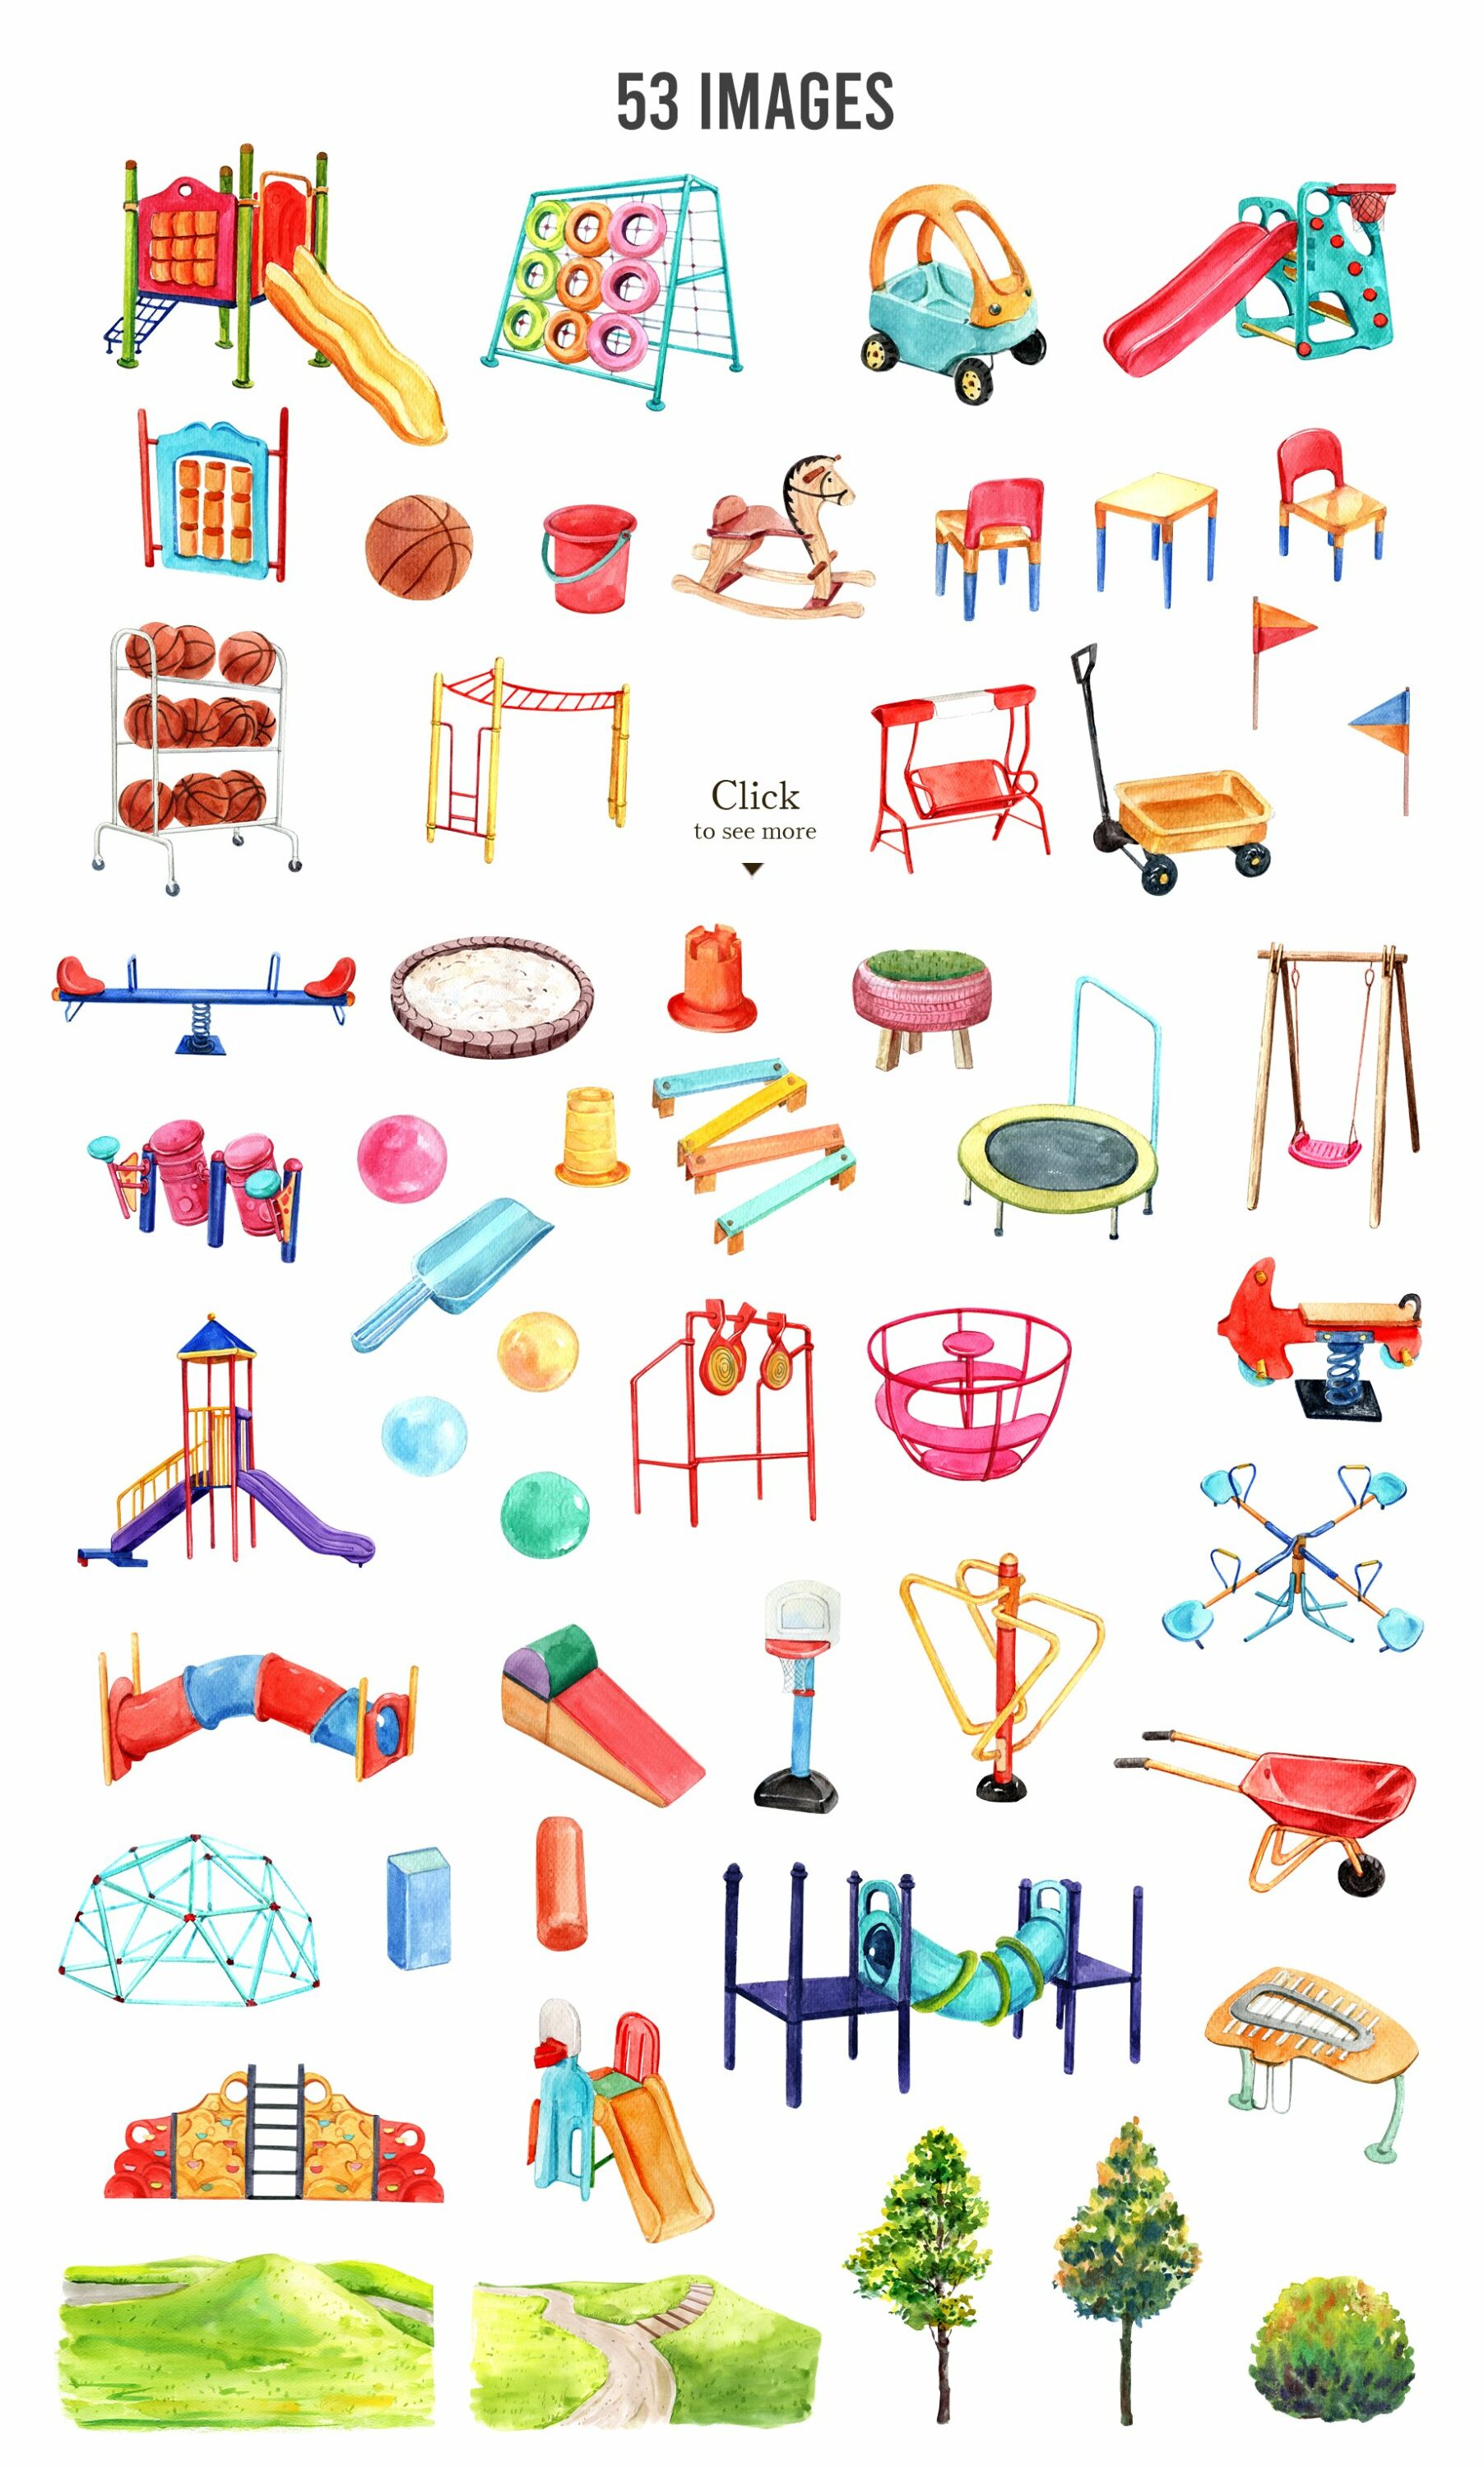 Colorful playground elements.